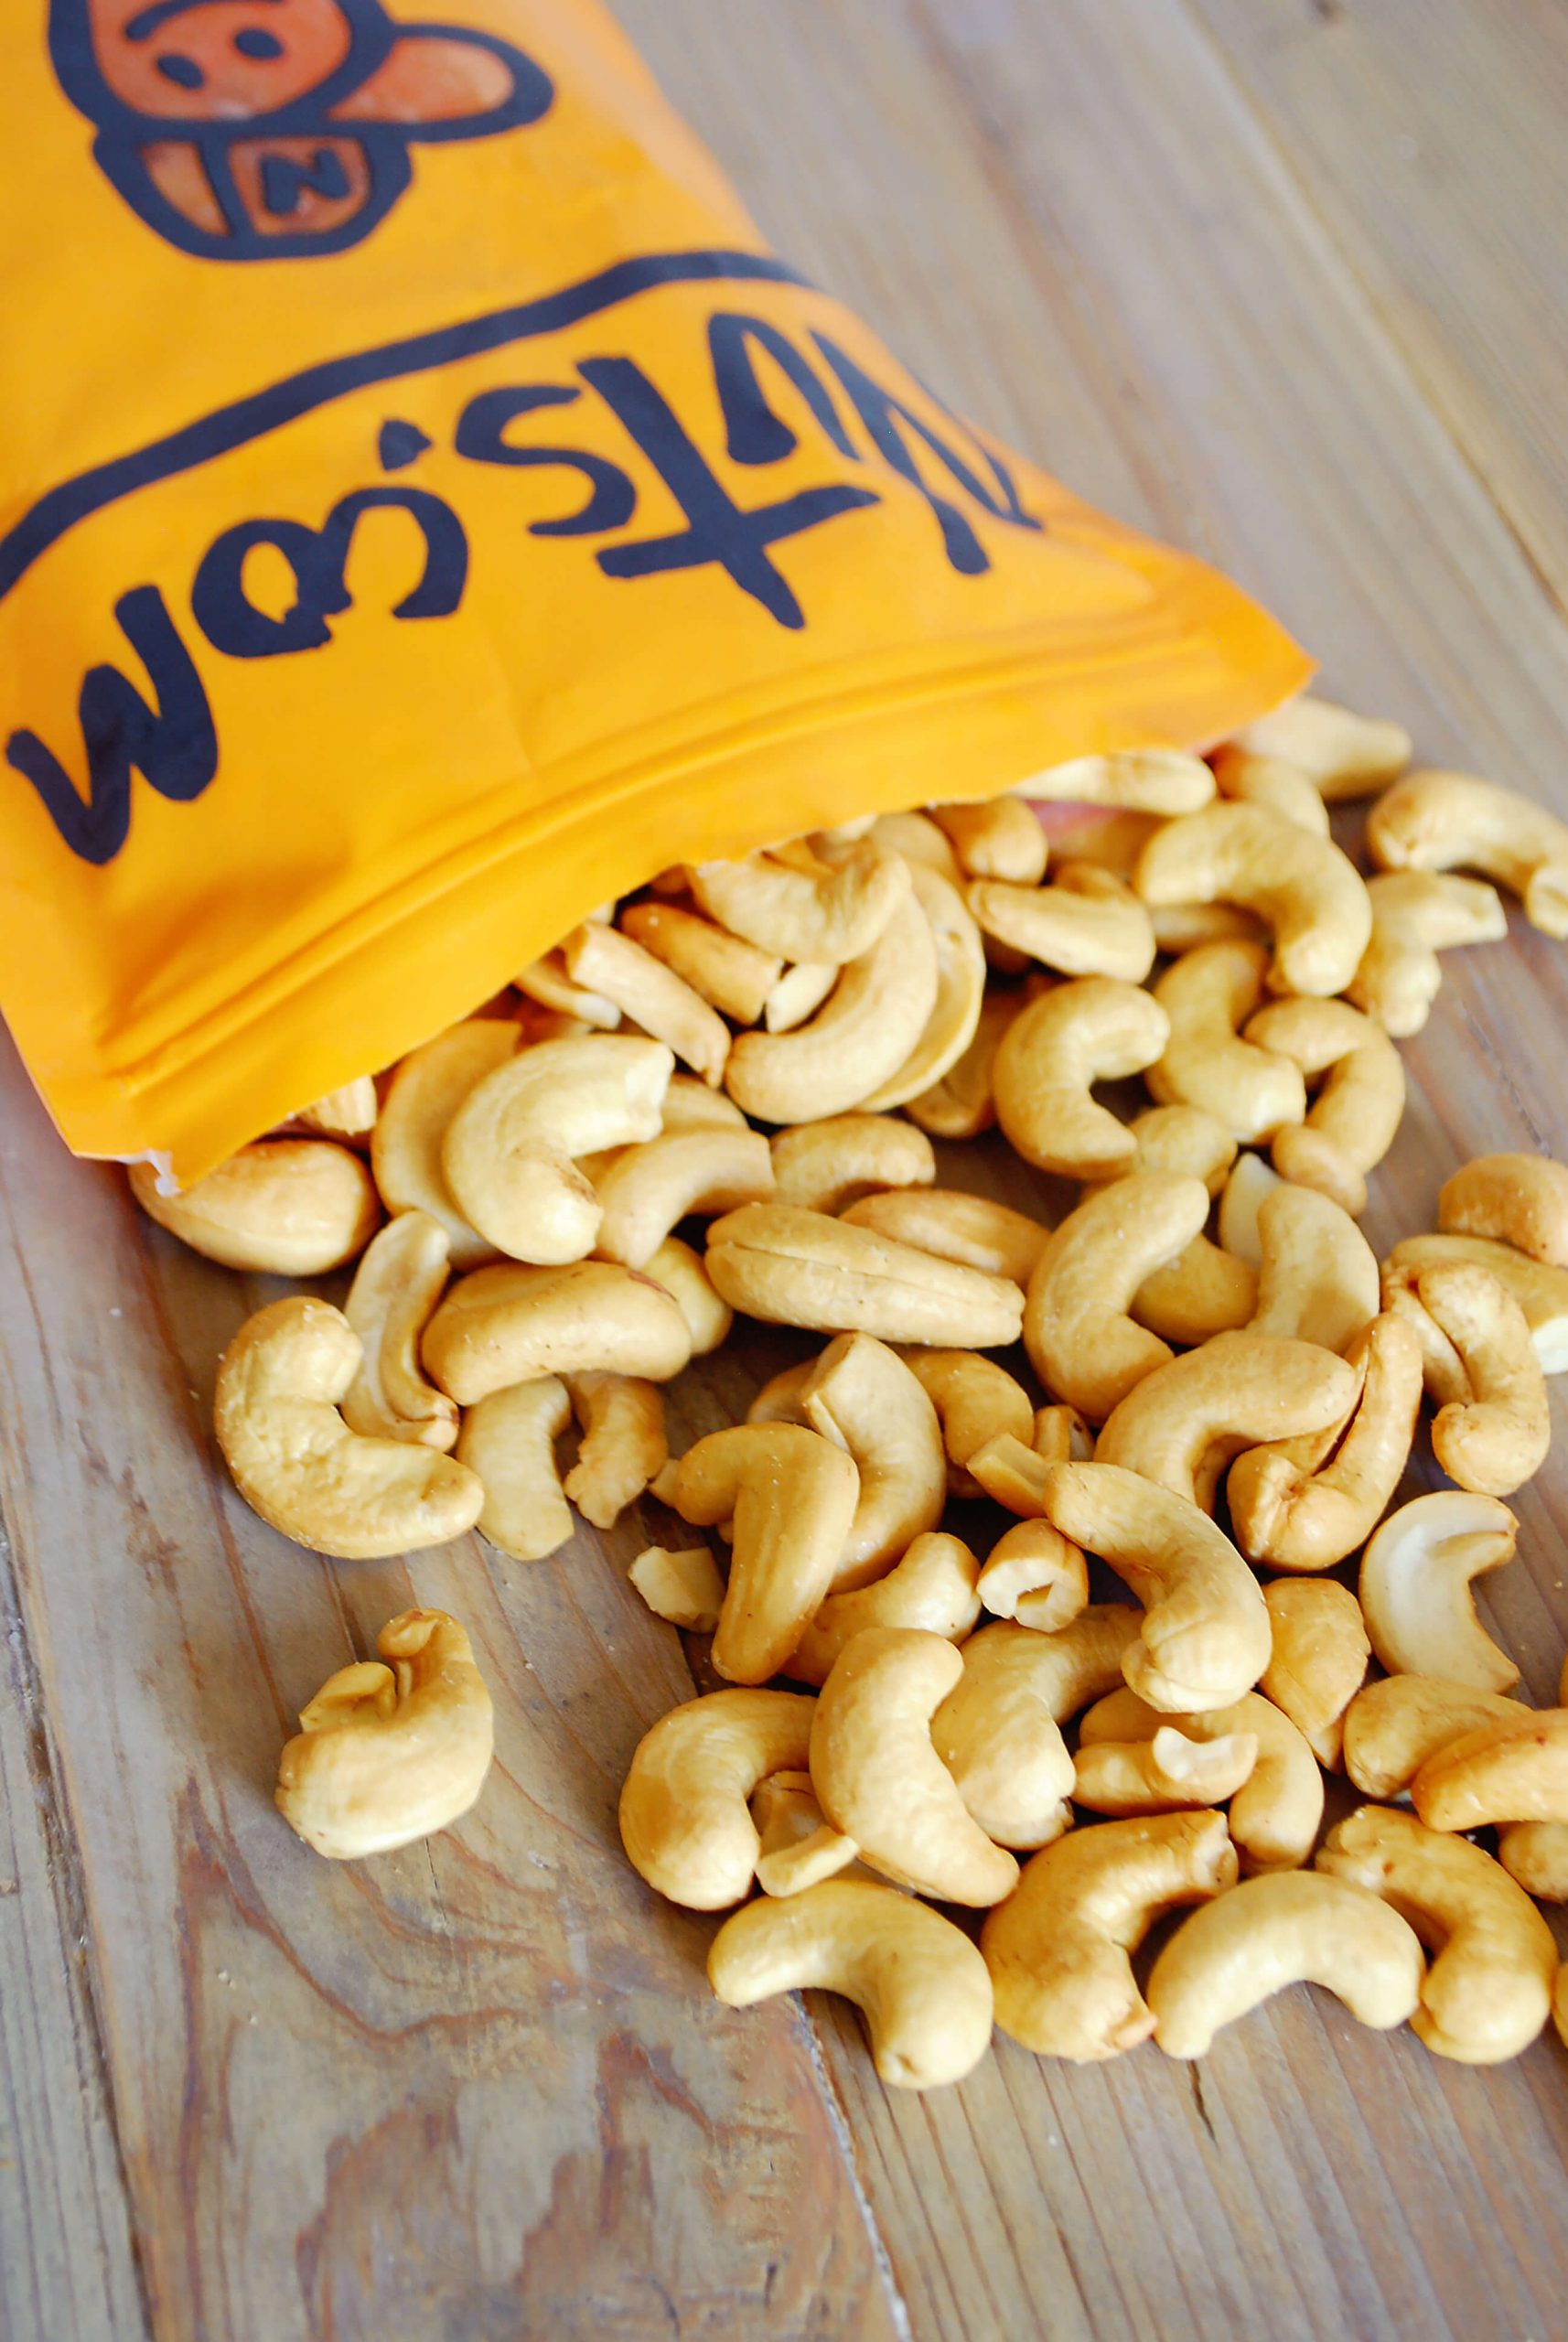 Cashew Nuts: Potential Health Benefits, Nutrition Facts